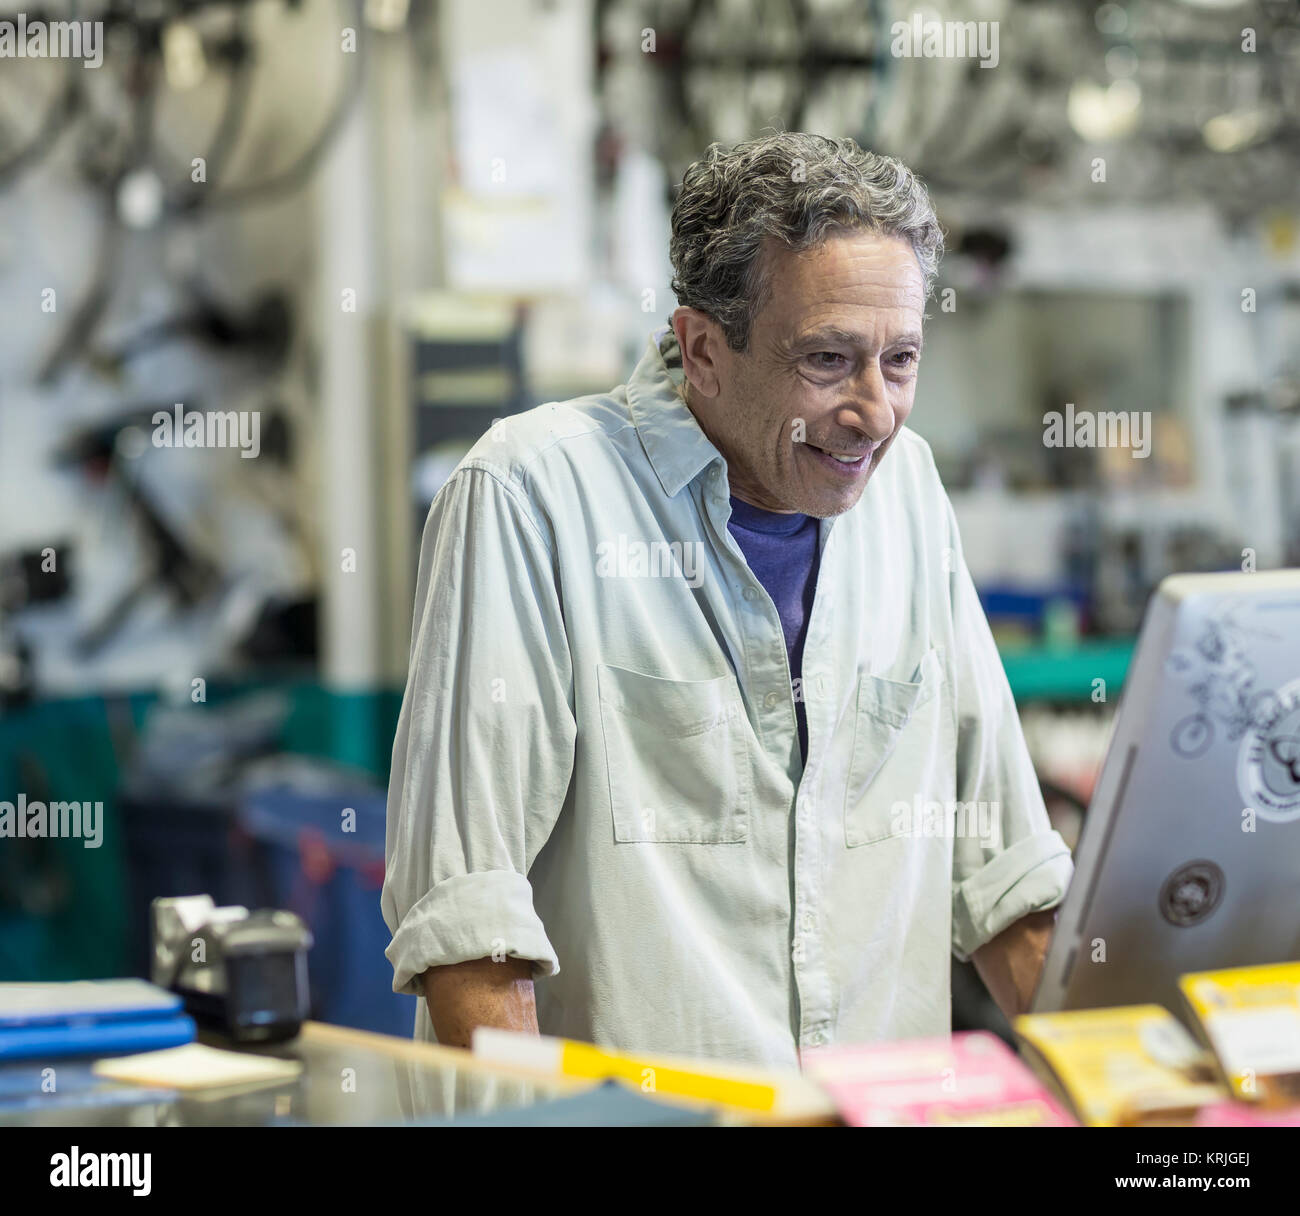 Smiling Caucasian man using computer in bicycle shop Stock Photo